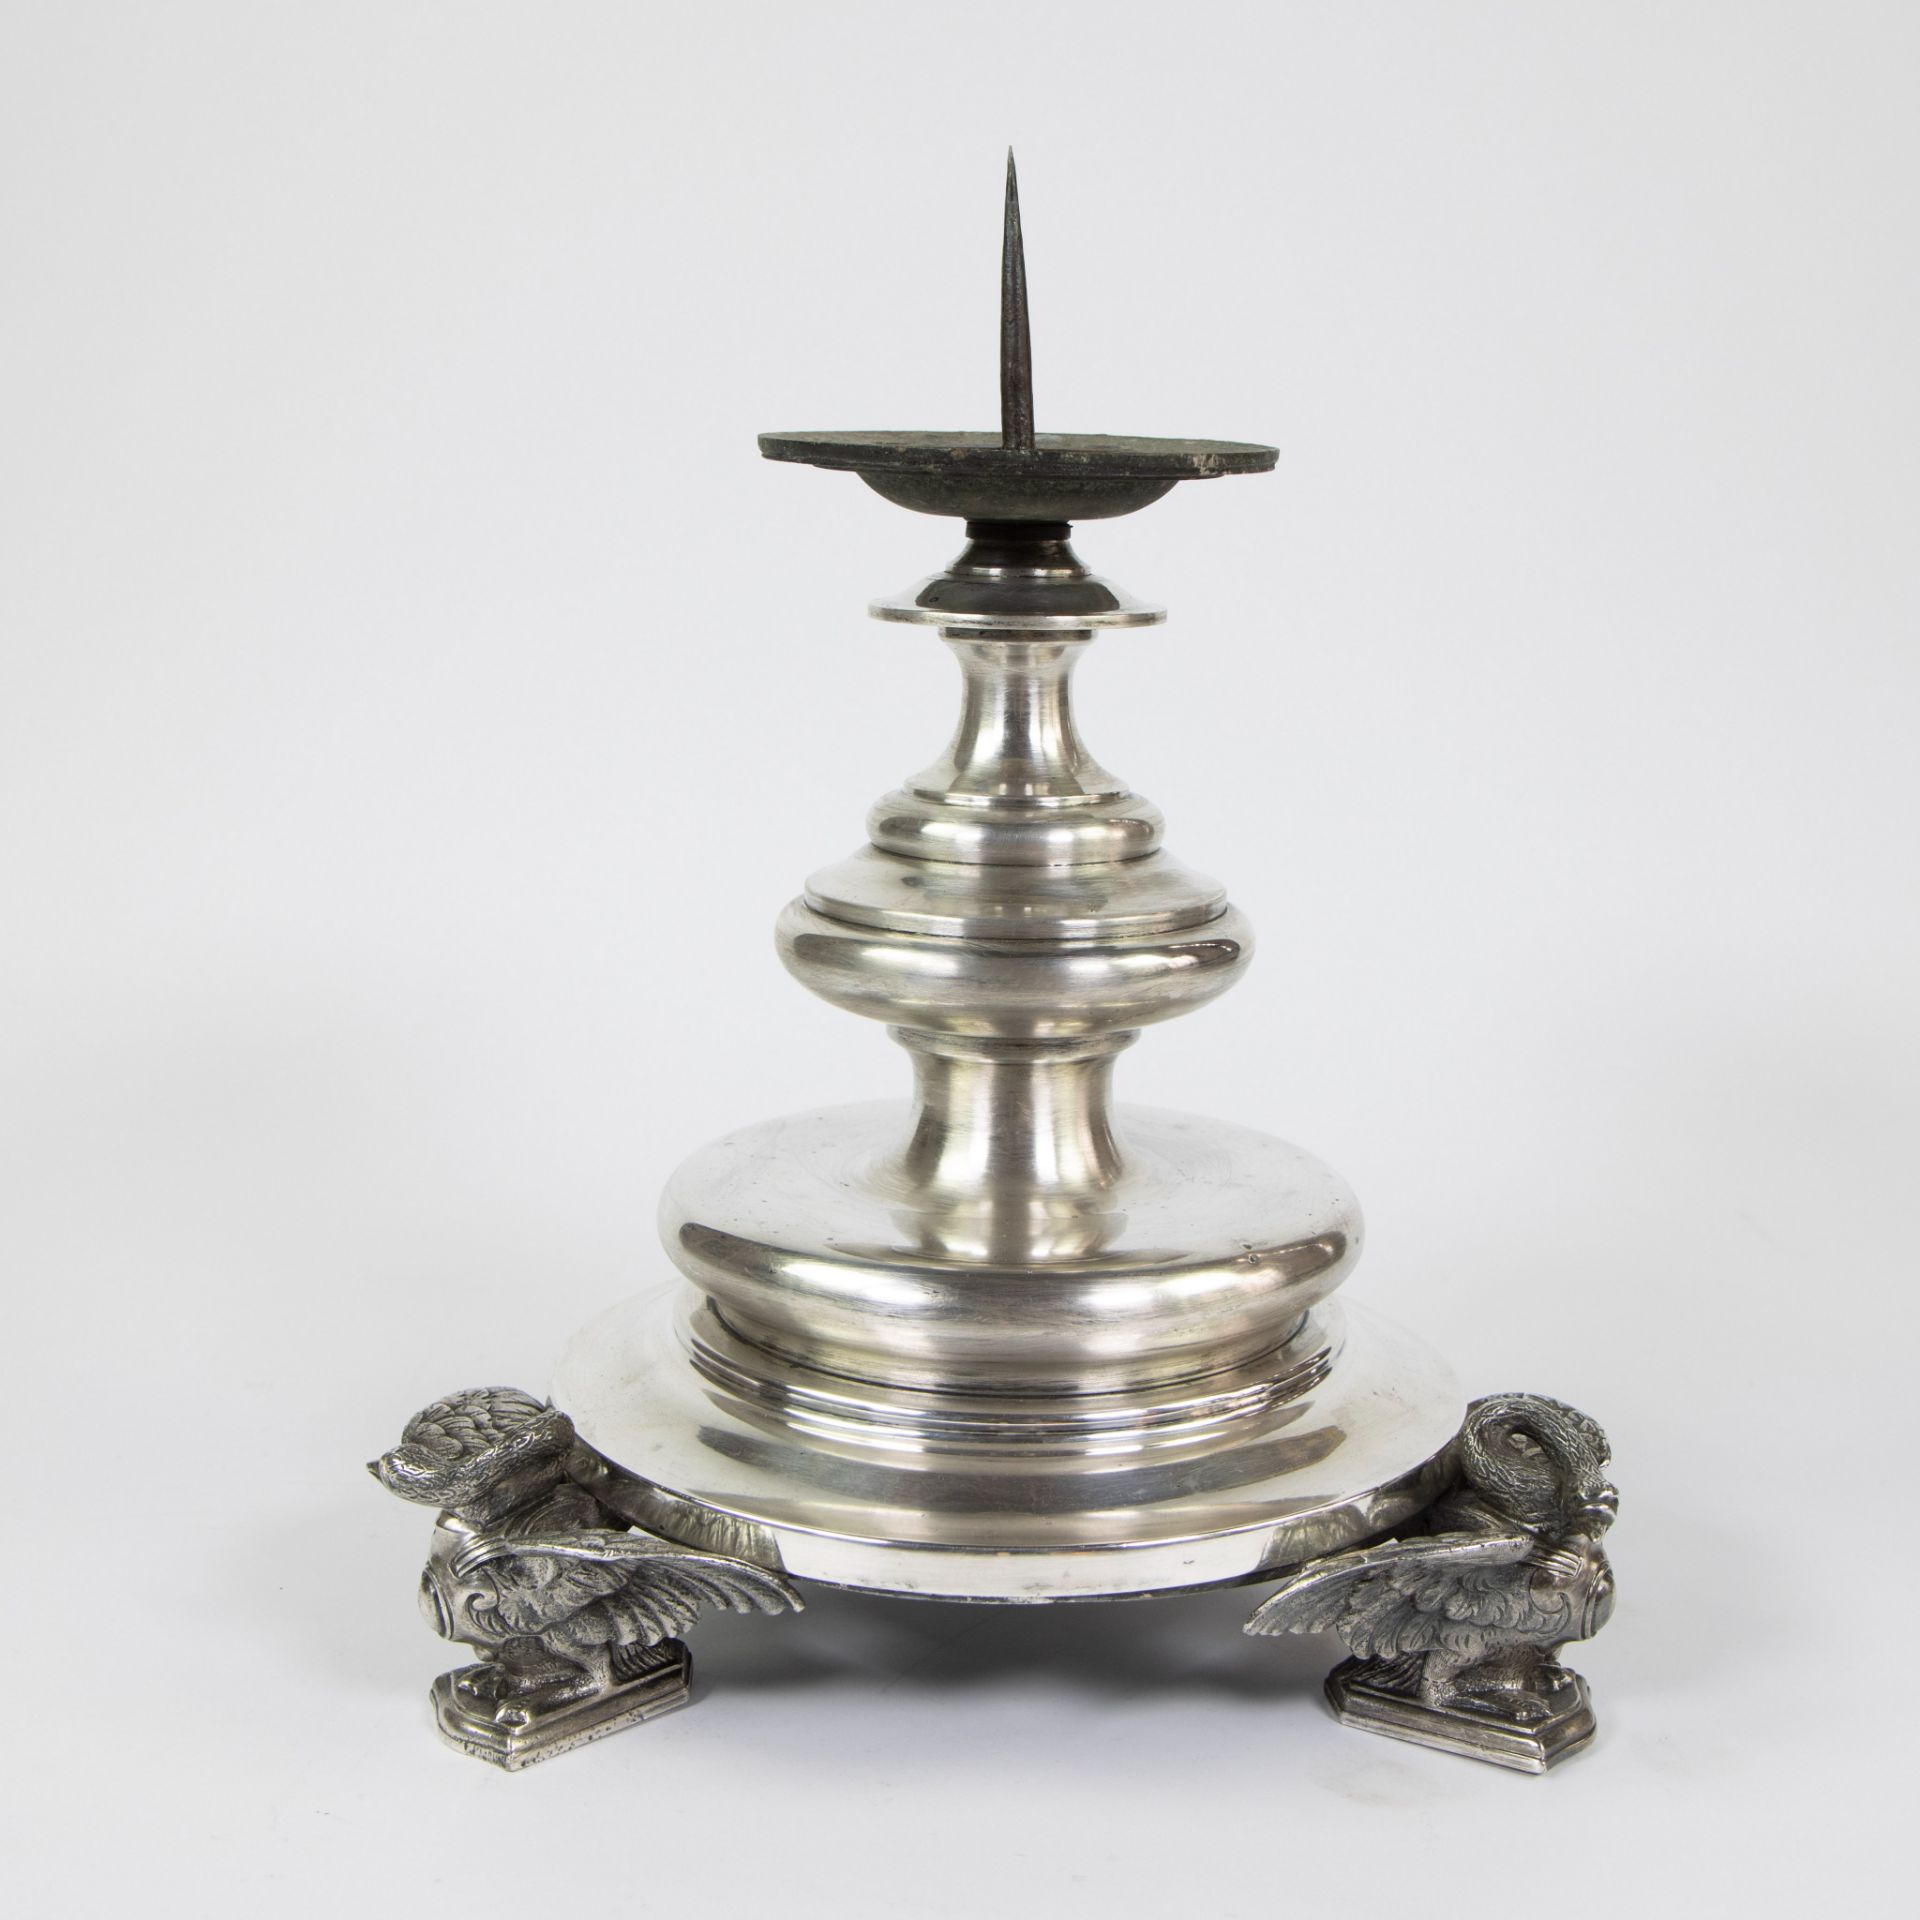 Silver plated candlestick with three swans as legs - Image 4 of 5